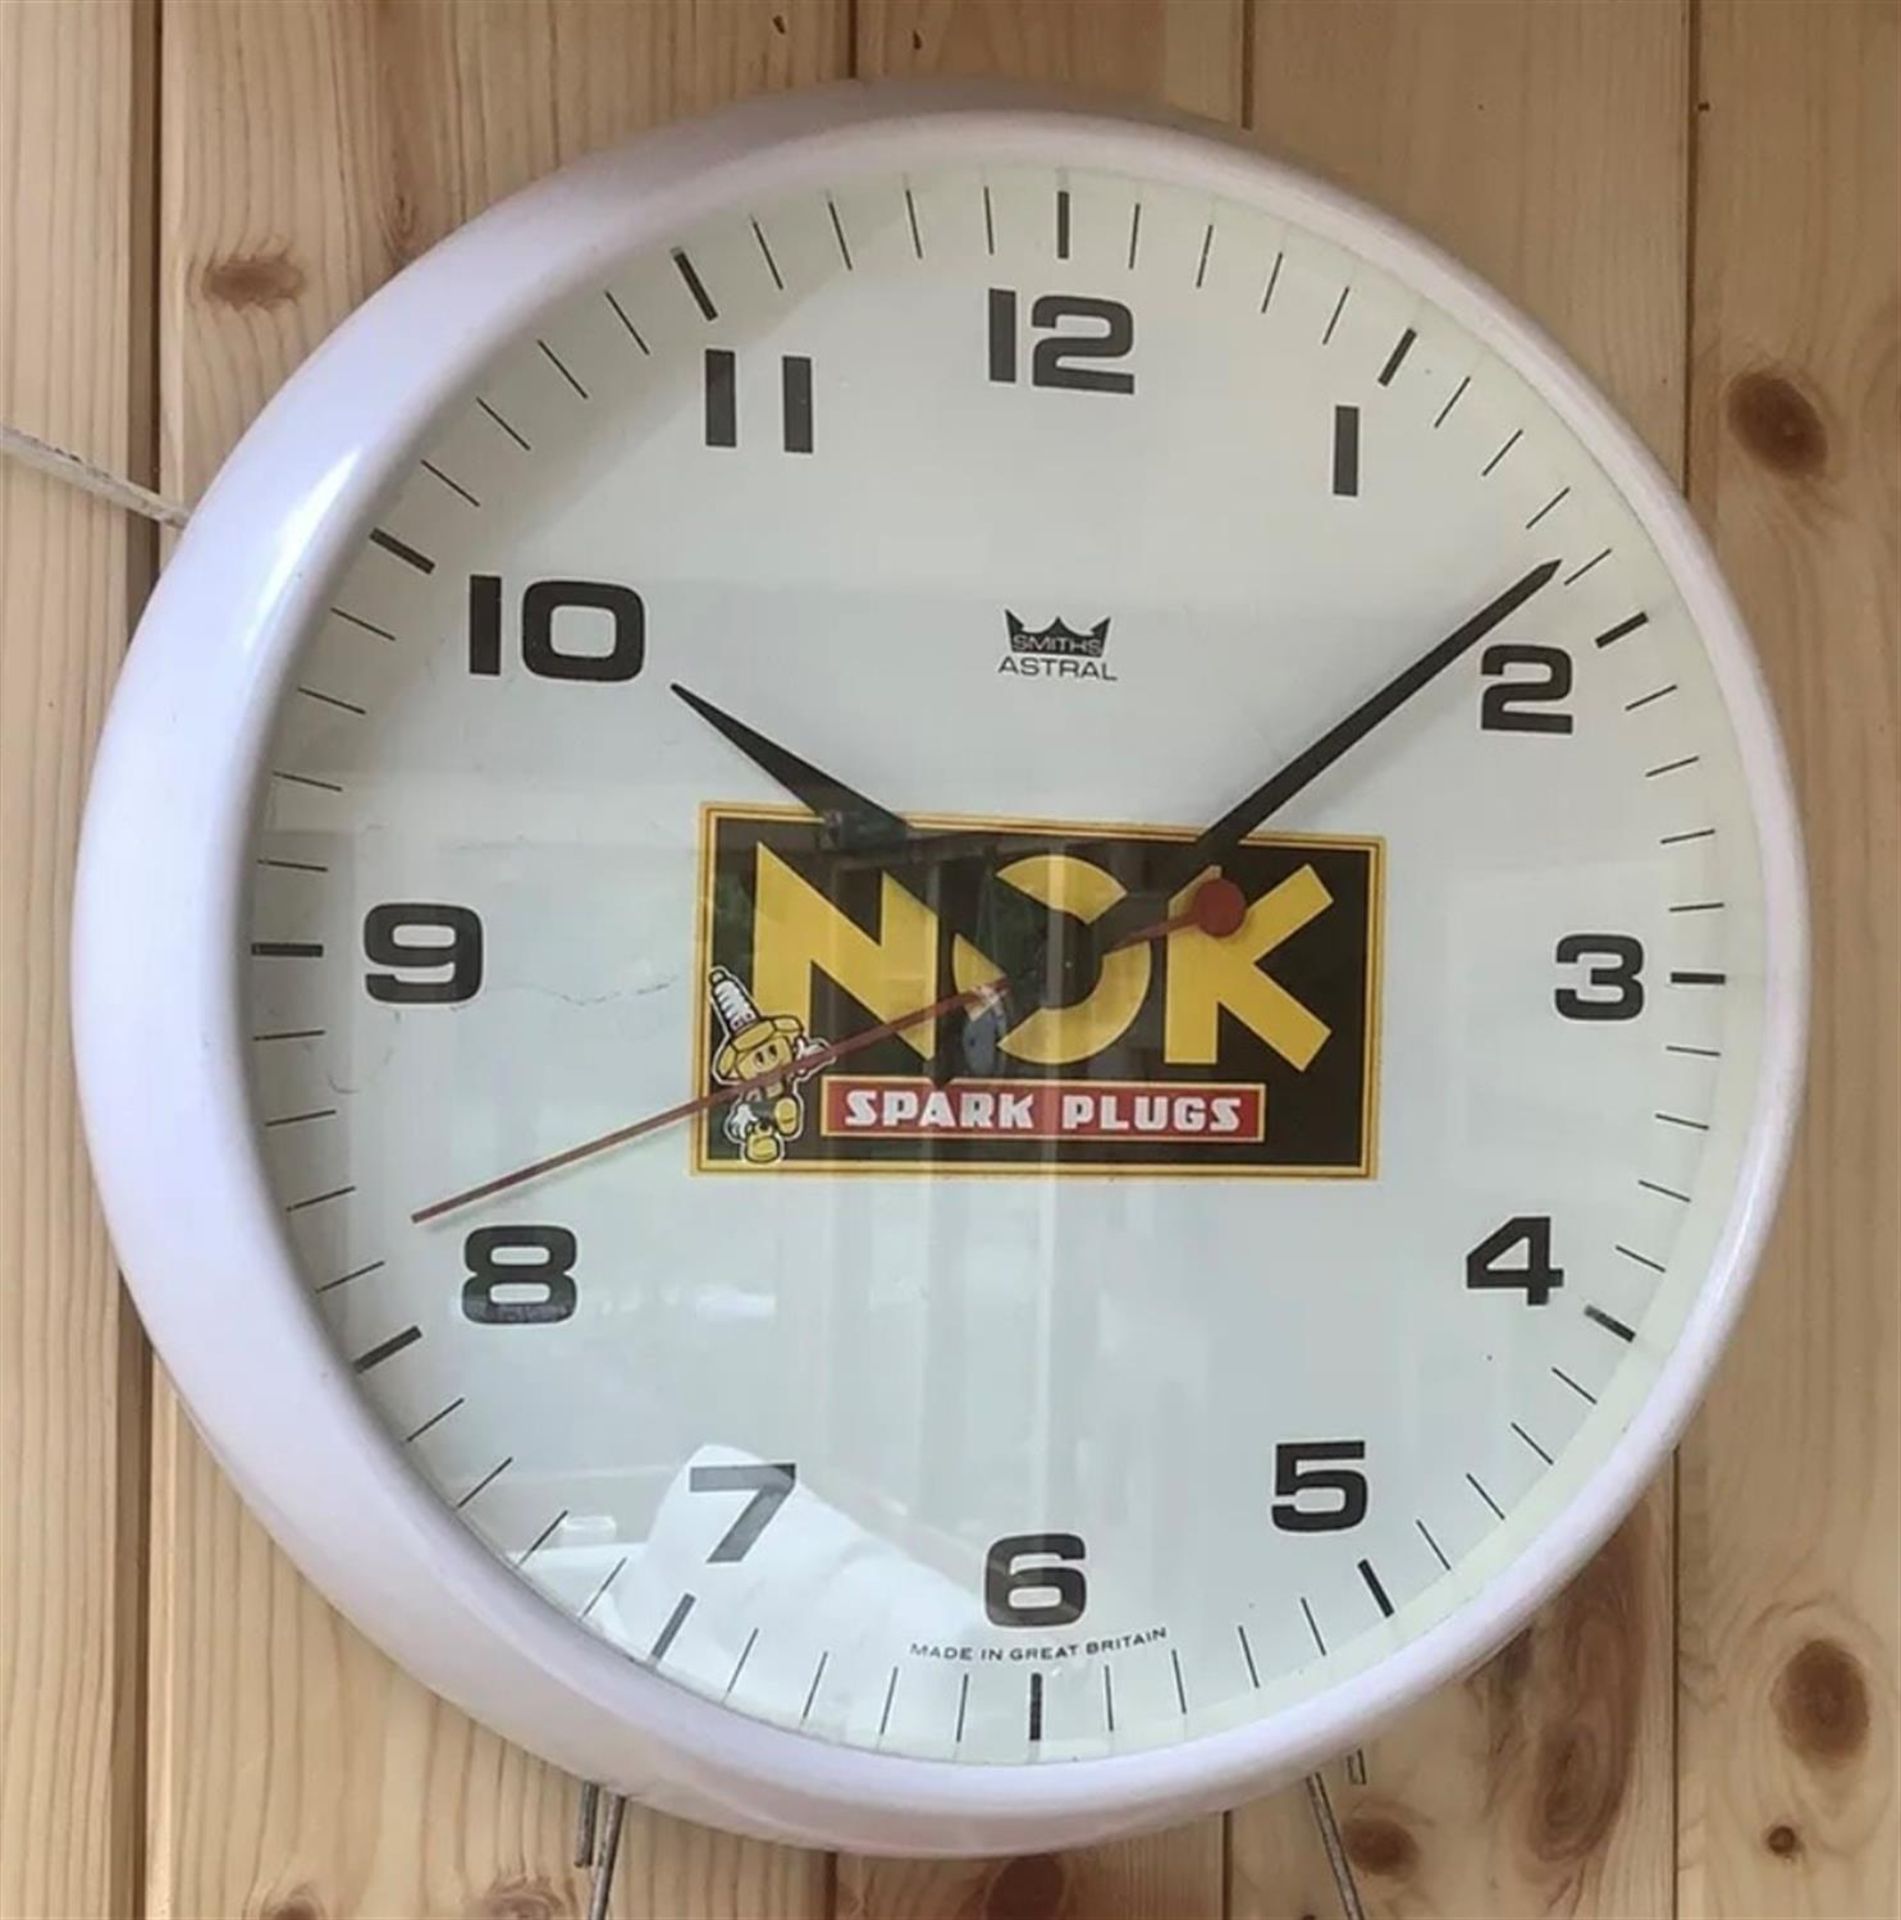 A Rare NGK Spark Plugs 14" Smiths Astral Dial Clock - Image 3 of 9